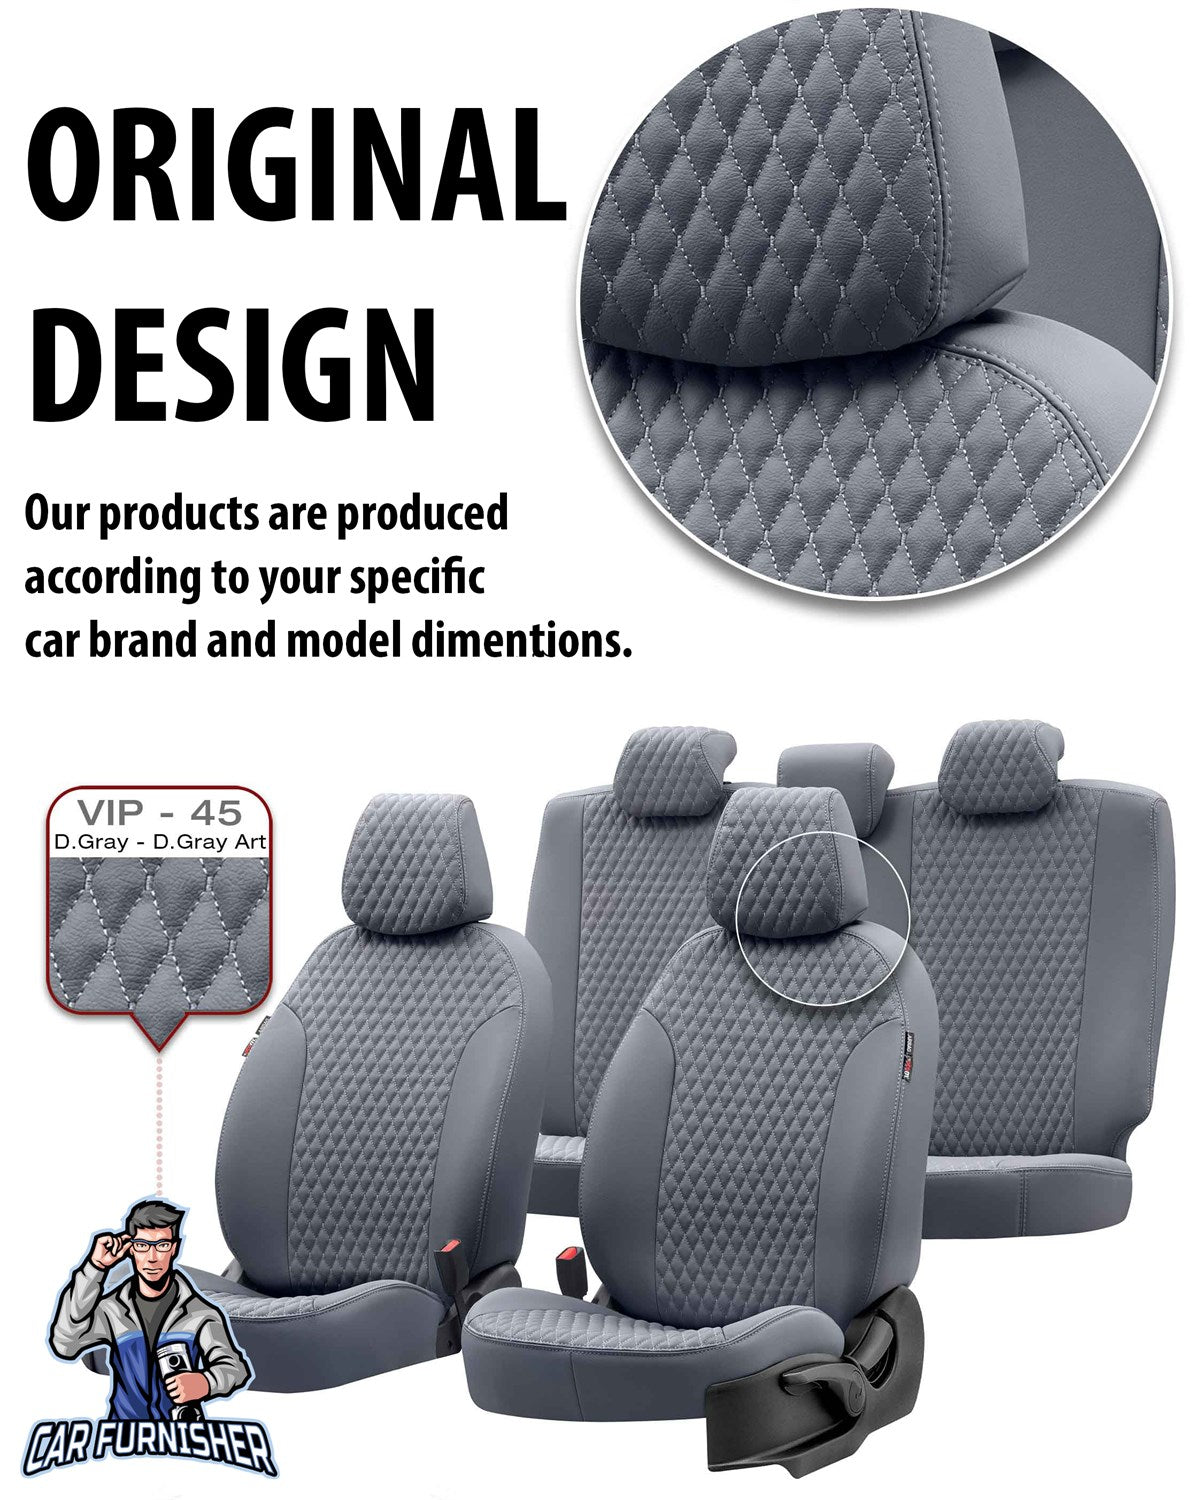 Ssangyong Actyon Seat Covers Amsterdam Leather Design Smoked Black Leather